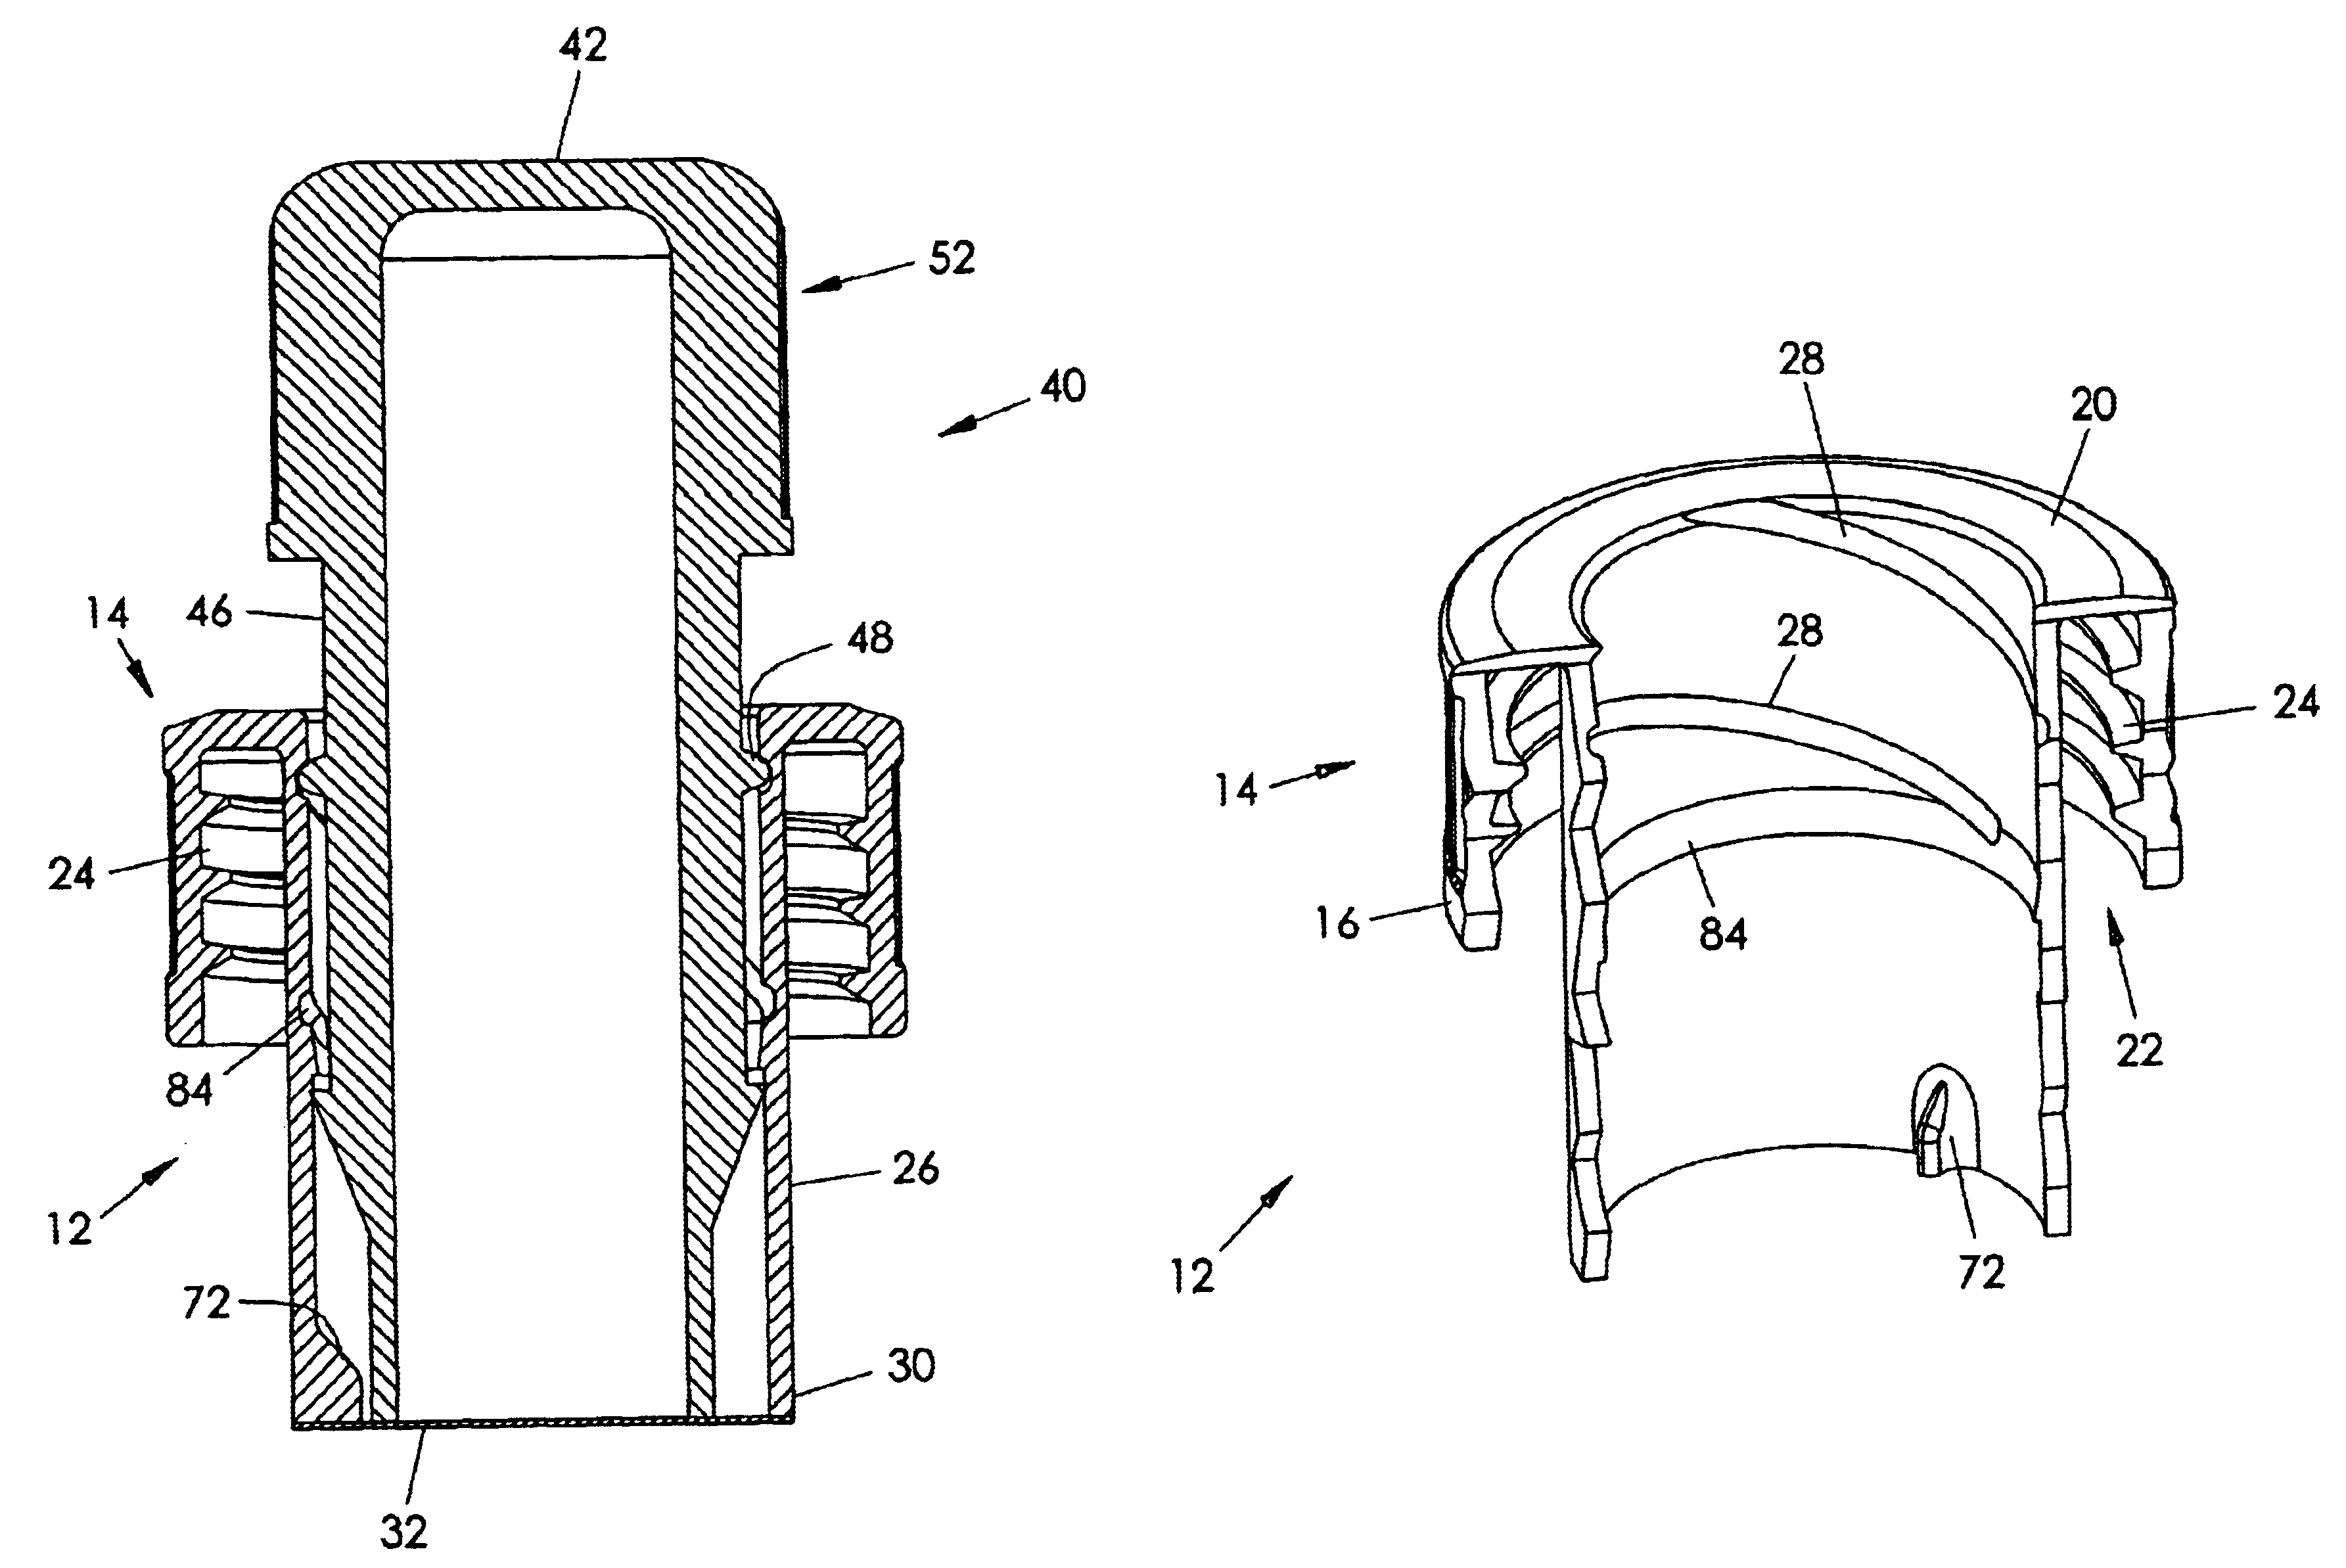 Beverage storage and discharge cap assembly